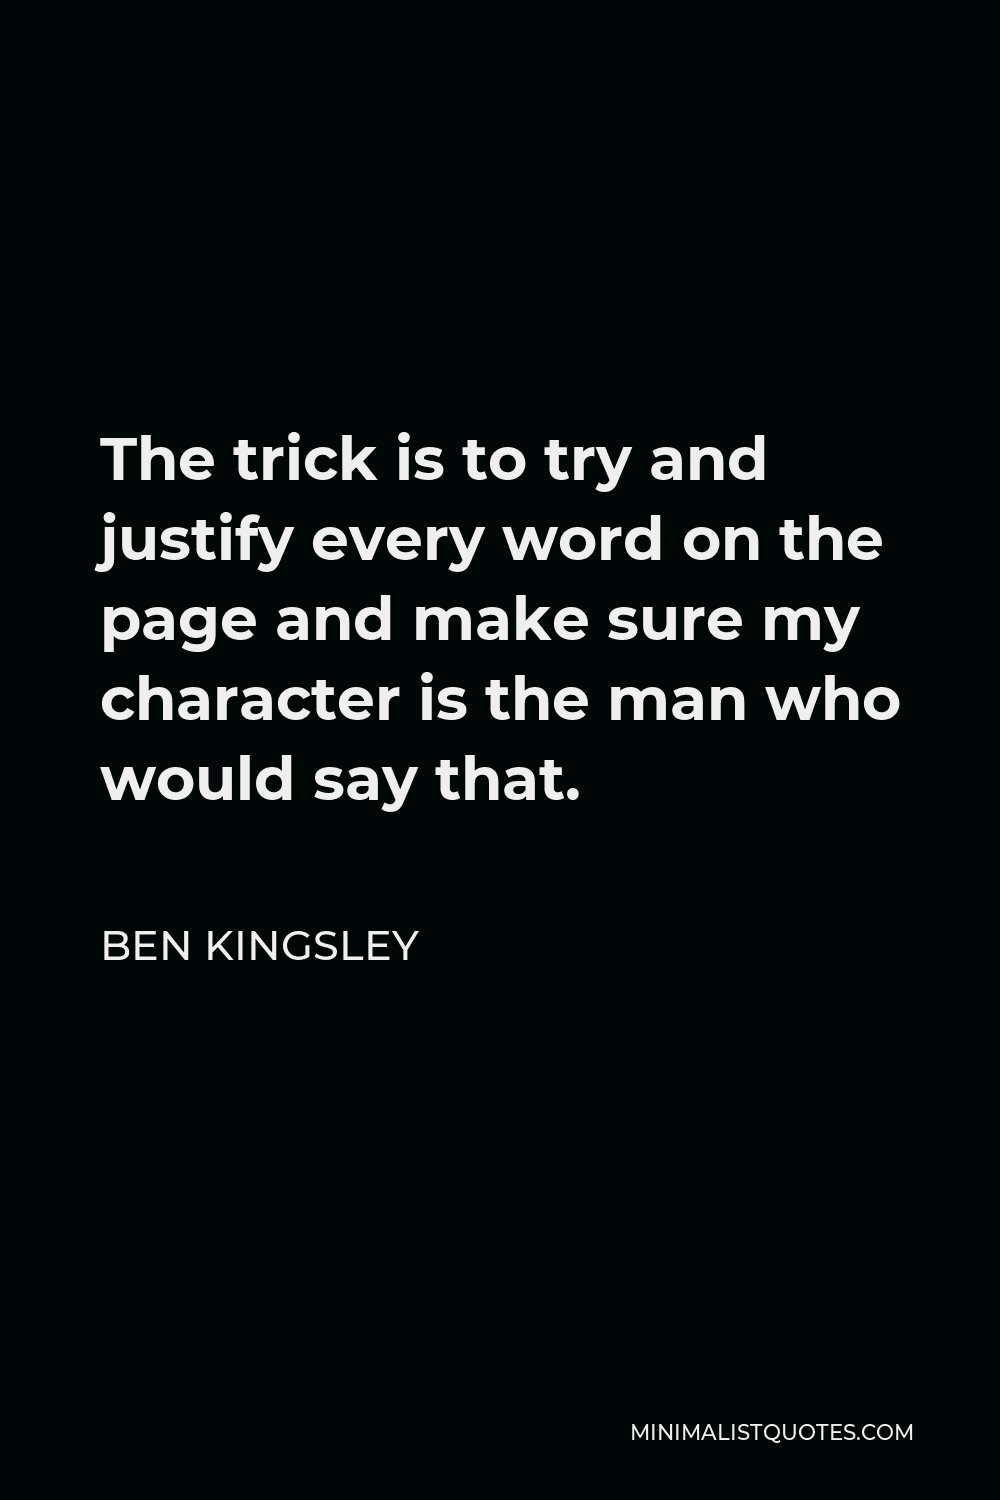 Ben Kingsley Quote - The trick is to try and justify every word on the page and make sure my character is the man who would say that.